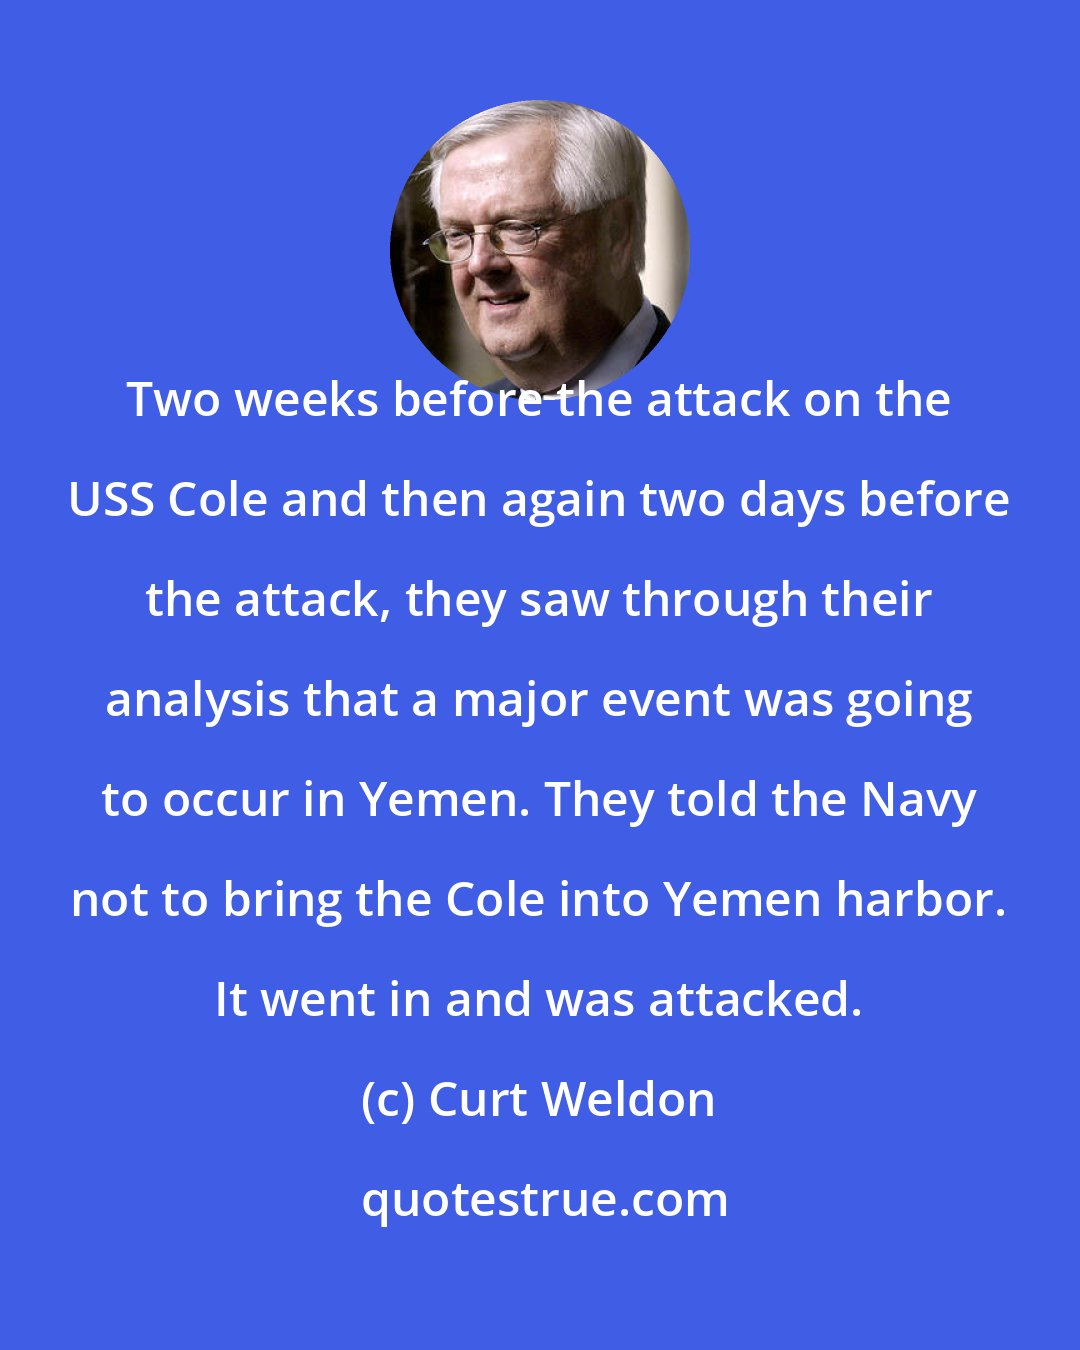 Curt Weldon: Two weeks before the attack on the USS Cole and then again two days before the attack, they saw through their analysis that a major event was going to occur in Yemen. They told the Navy not to bring the Cole into Yemen harbor. It went in and was attacked.